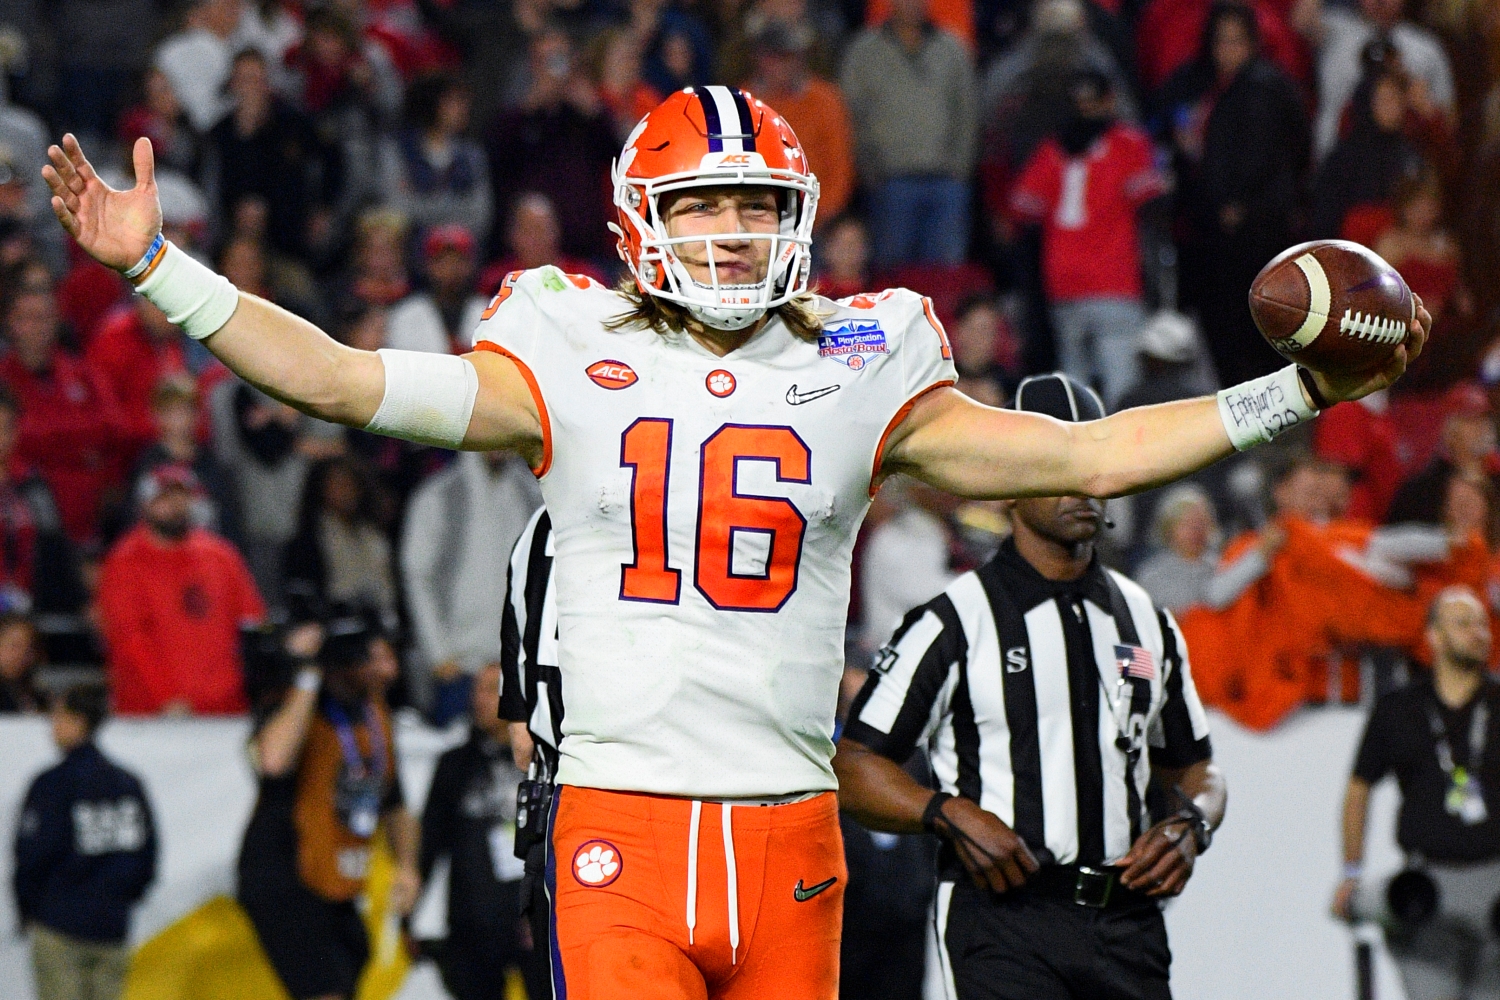 Top 2021 NFL draft prospect Trevor Lawrence celebrates at the end of a game from the 2019 college football season.